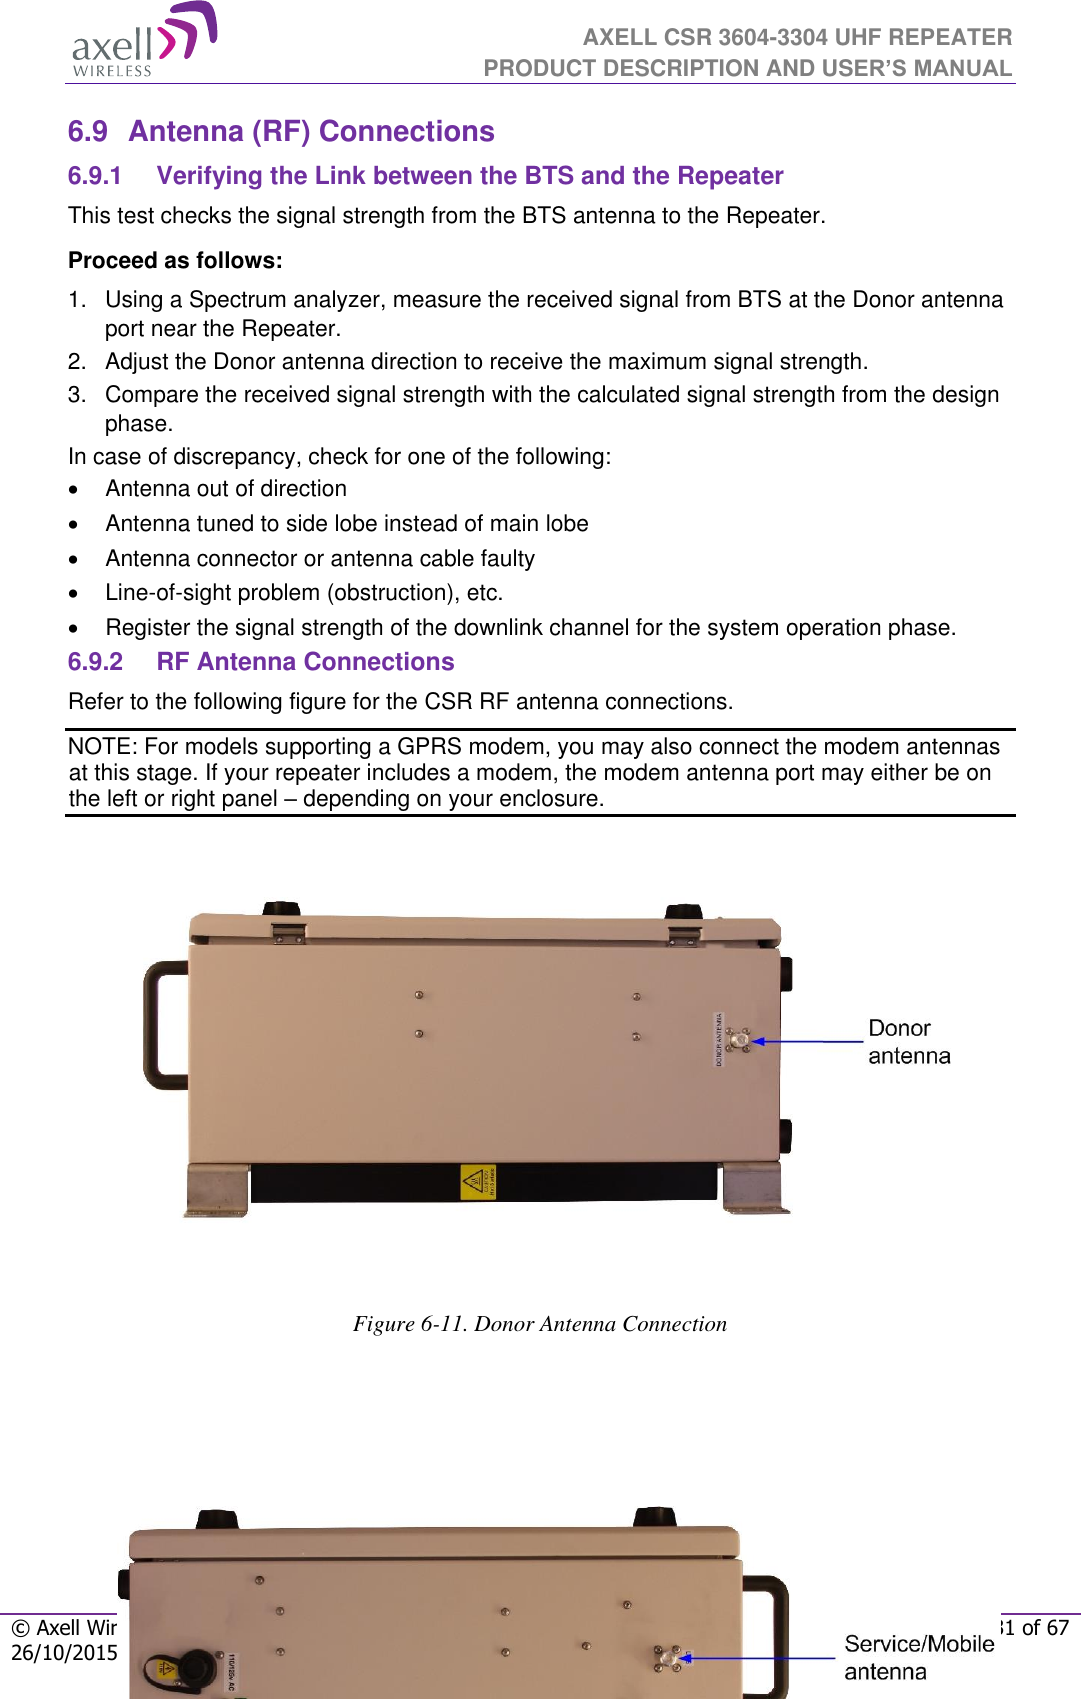  AXELL CSR 3604-3304 UHF REPEATER PRODUCT DESCRIPTION AND USER’S MANUAL  © Axell Wireless Ltd Document number: 3633B-UM Page 31 of 67 26/10/2015 Revision. 4   6.9  Antenna (RF) Connections 6.9.1  Verifying the Link between the BTS and the Repeater This test checks the signal strength from the BTS antenna to the Repeater.  Proceed as follows:  1.  Using a Spectrum analyzer, measure the received signal from BTS at the Donor antenna port near the Repeater.  2.  Adjust the Donor antenna direction to receive the maximum signal strength. 3.  Compare the received signal strength with the calculated signal strength from the design phase.  In case of discrepancy, check for one of the following:    Antenna out of direction    Antenna tuned to side lobe instead of main lobe    Antenna connector or antenna cable faulty   Line-of-sight problem (obstruction), etc.   Register the signal strength of the downlink channel for the system operation phase. 6.9.2  RF Antenna Connections Refer to the following figure for the CSR RF antenna connections.  NOTE: For models supporting a GPRS modem, you may also connect the modem antennas at this stage. If your repeater includes a modem, the modem antenna port may either be on the left or right panel – depending on your enclosure.                   Figure 6-11. Donor Antenna Connection      